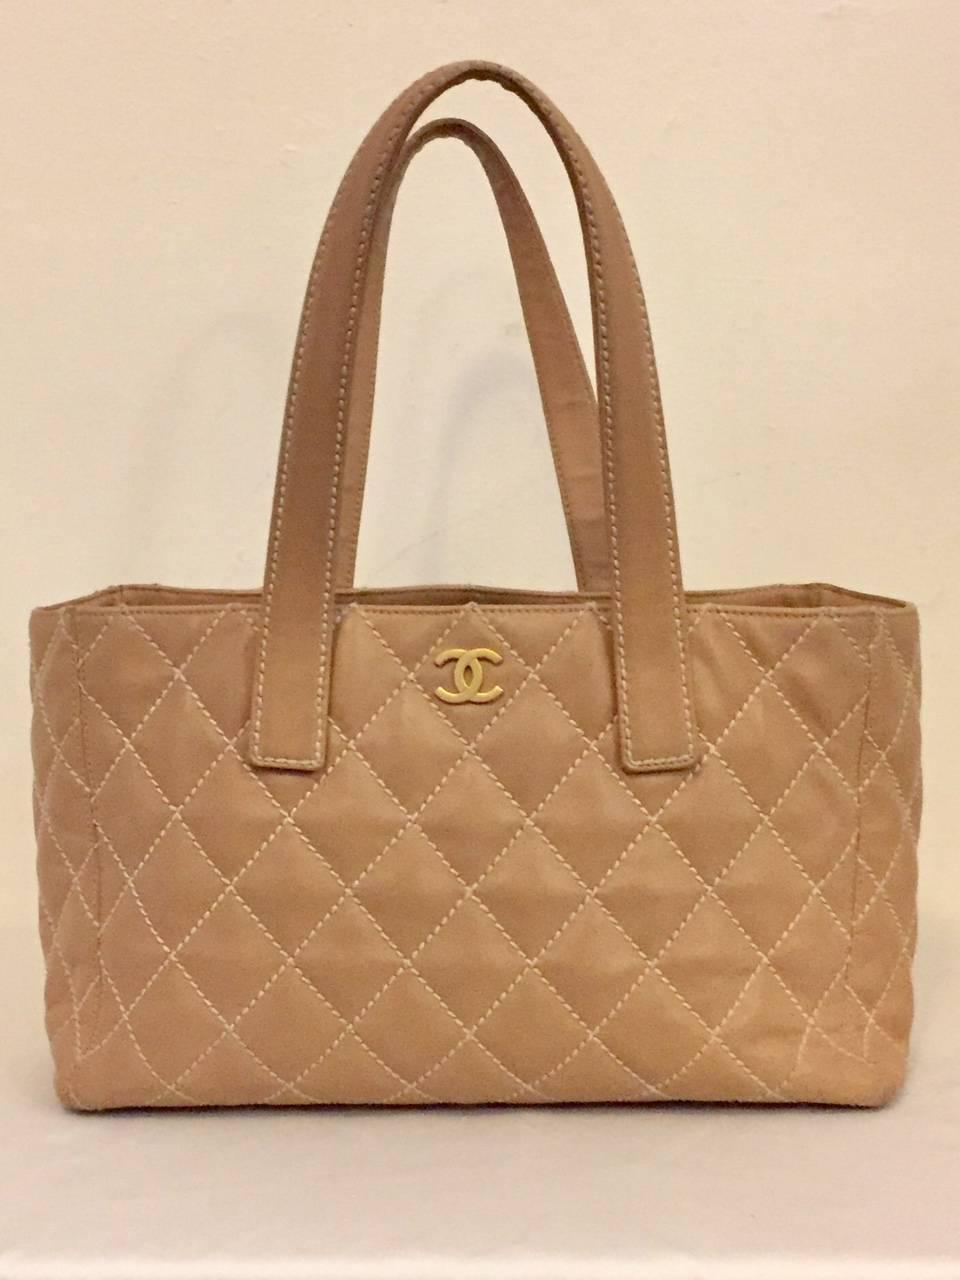 Chanel Tan Leather Tote is a favorite among those who can't get enough of all things 